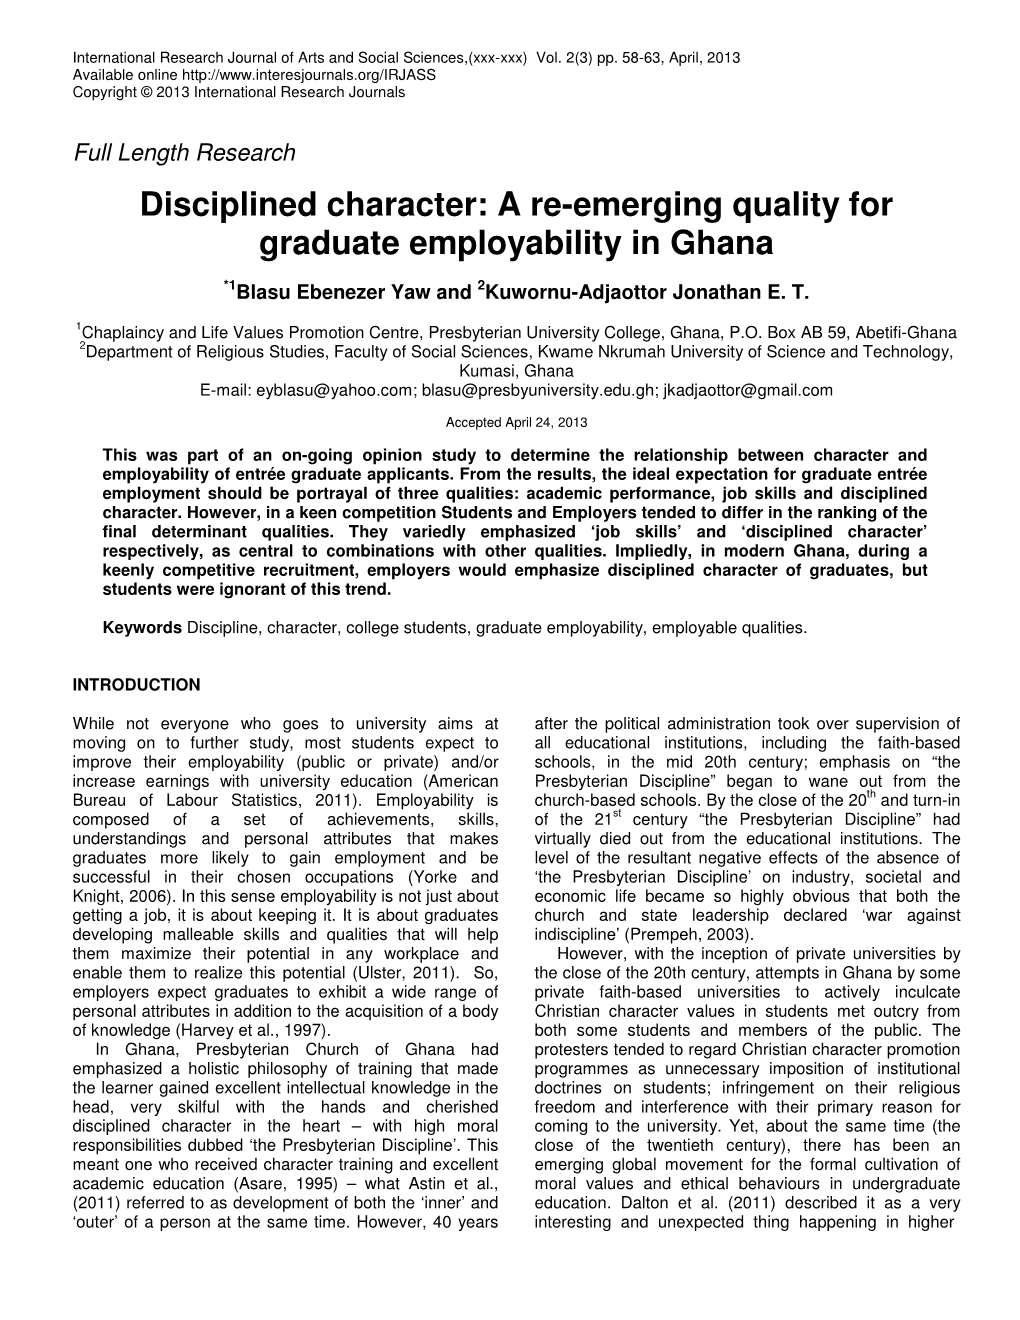 Disciplined Character: a Re-Emerging Quality for Graduate Employability in Ghana